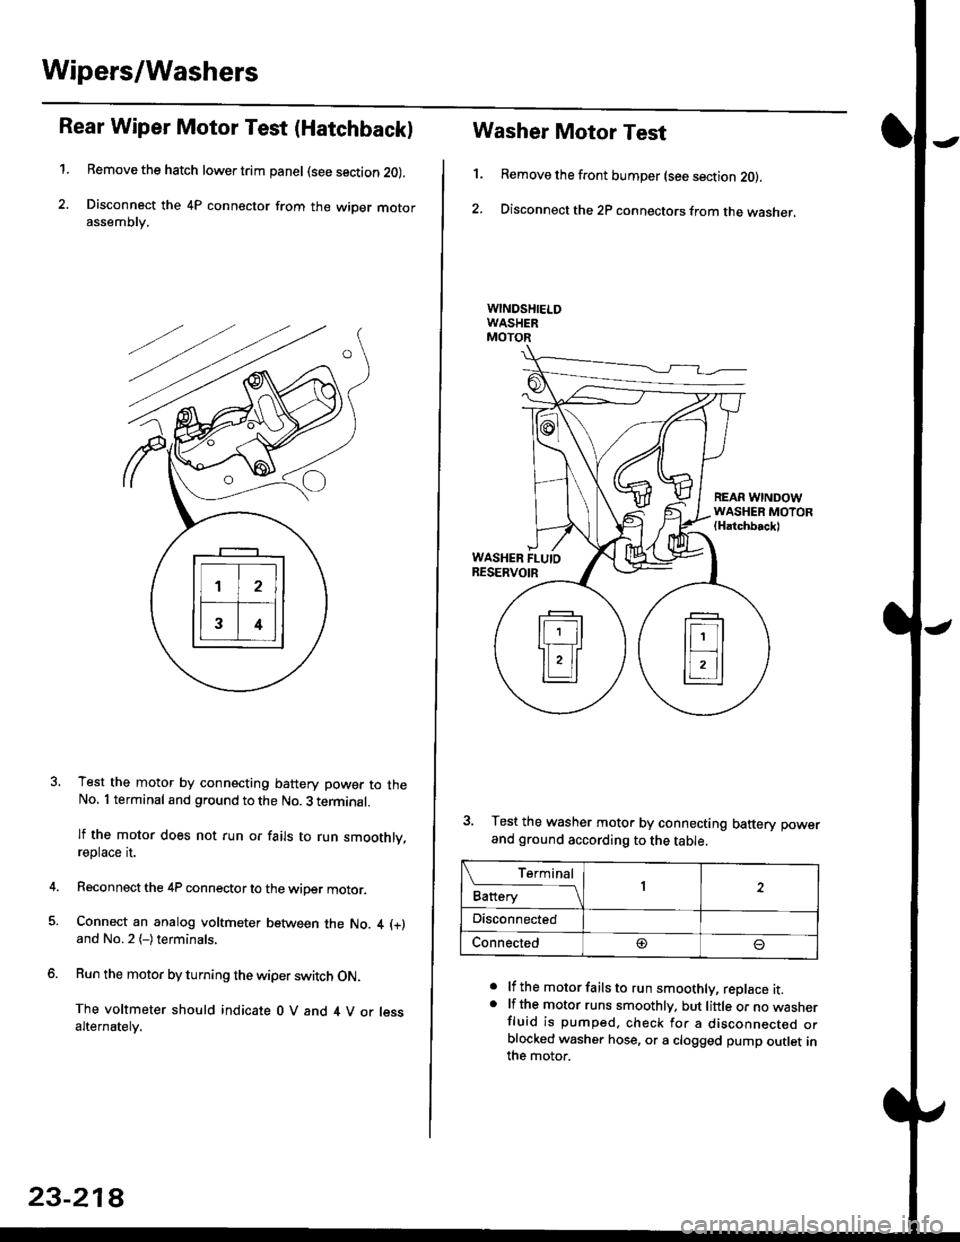 HONDA CIVIC 2000 6.G Workshop Manual Wipers/Washers
Rear Wiper Motor Test (Hatchback)
1.Remove the hatch lower trim panel (see section 20).
Disconnect the 4P connector from the wiper motorassemDry,
Test the motor by connecting battery po